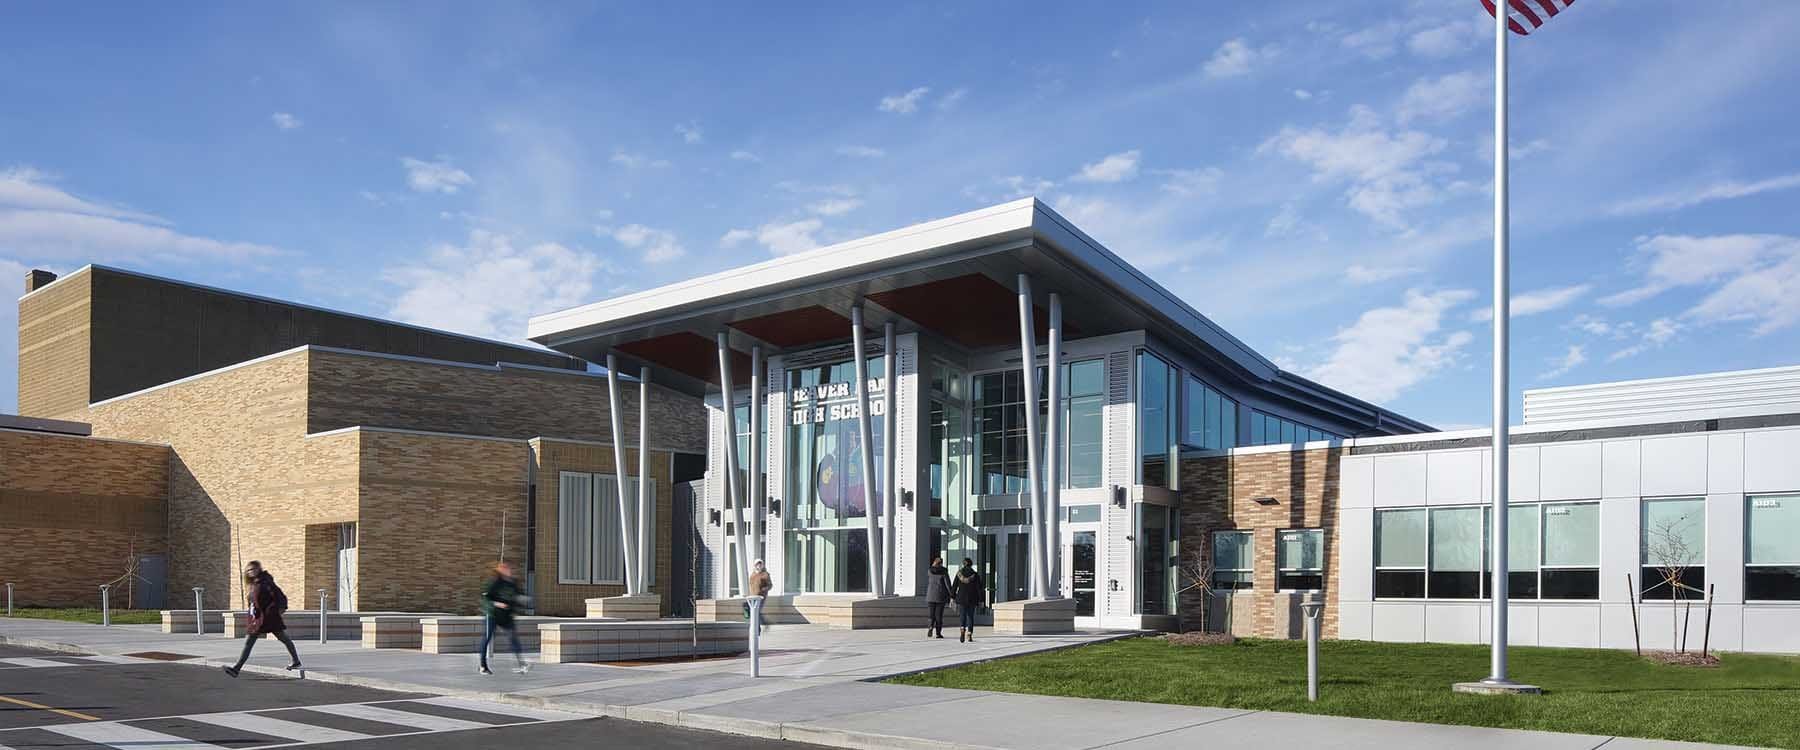 Modern school design interprets current architecture of modern industry and corporate design, as shown at the Beaver Dam High School, Beaver Dam Wisconsin